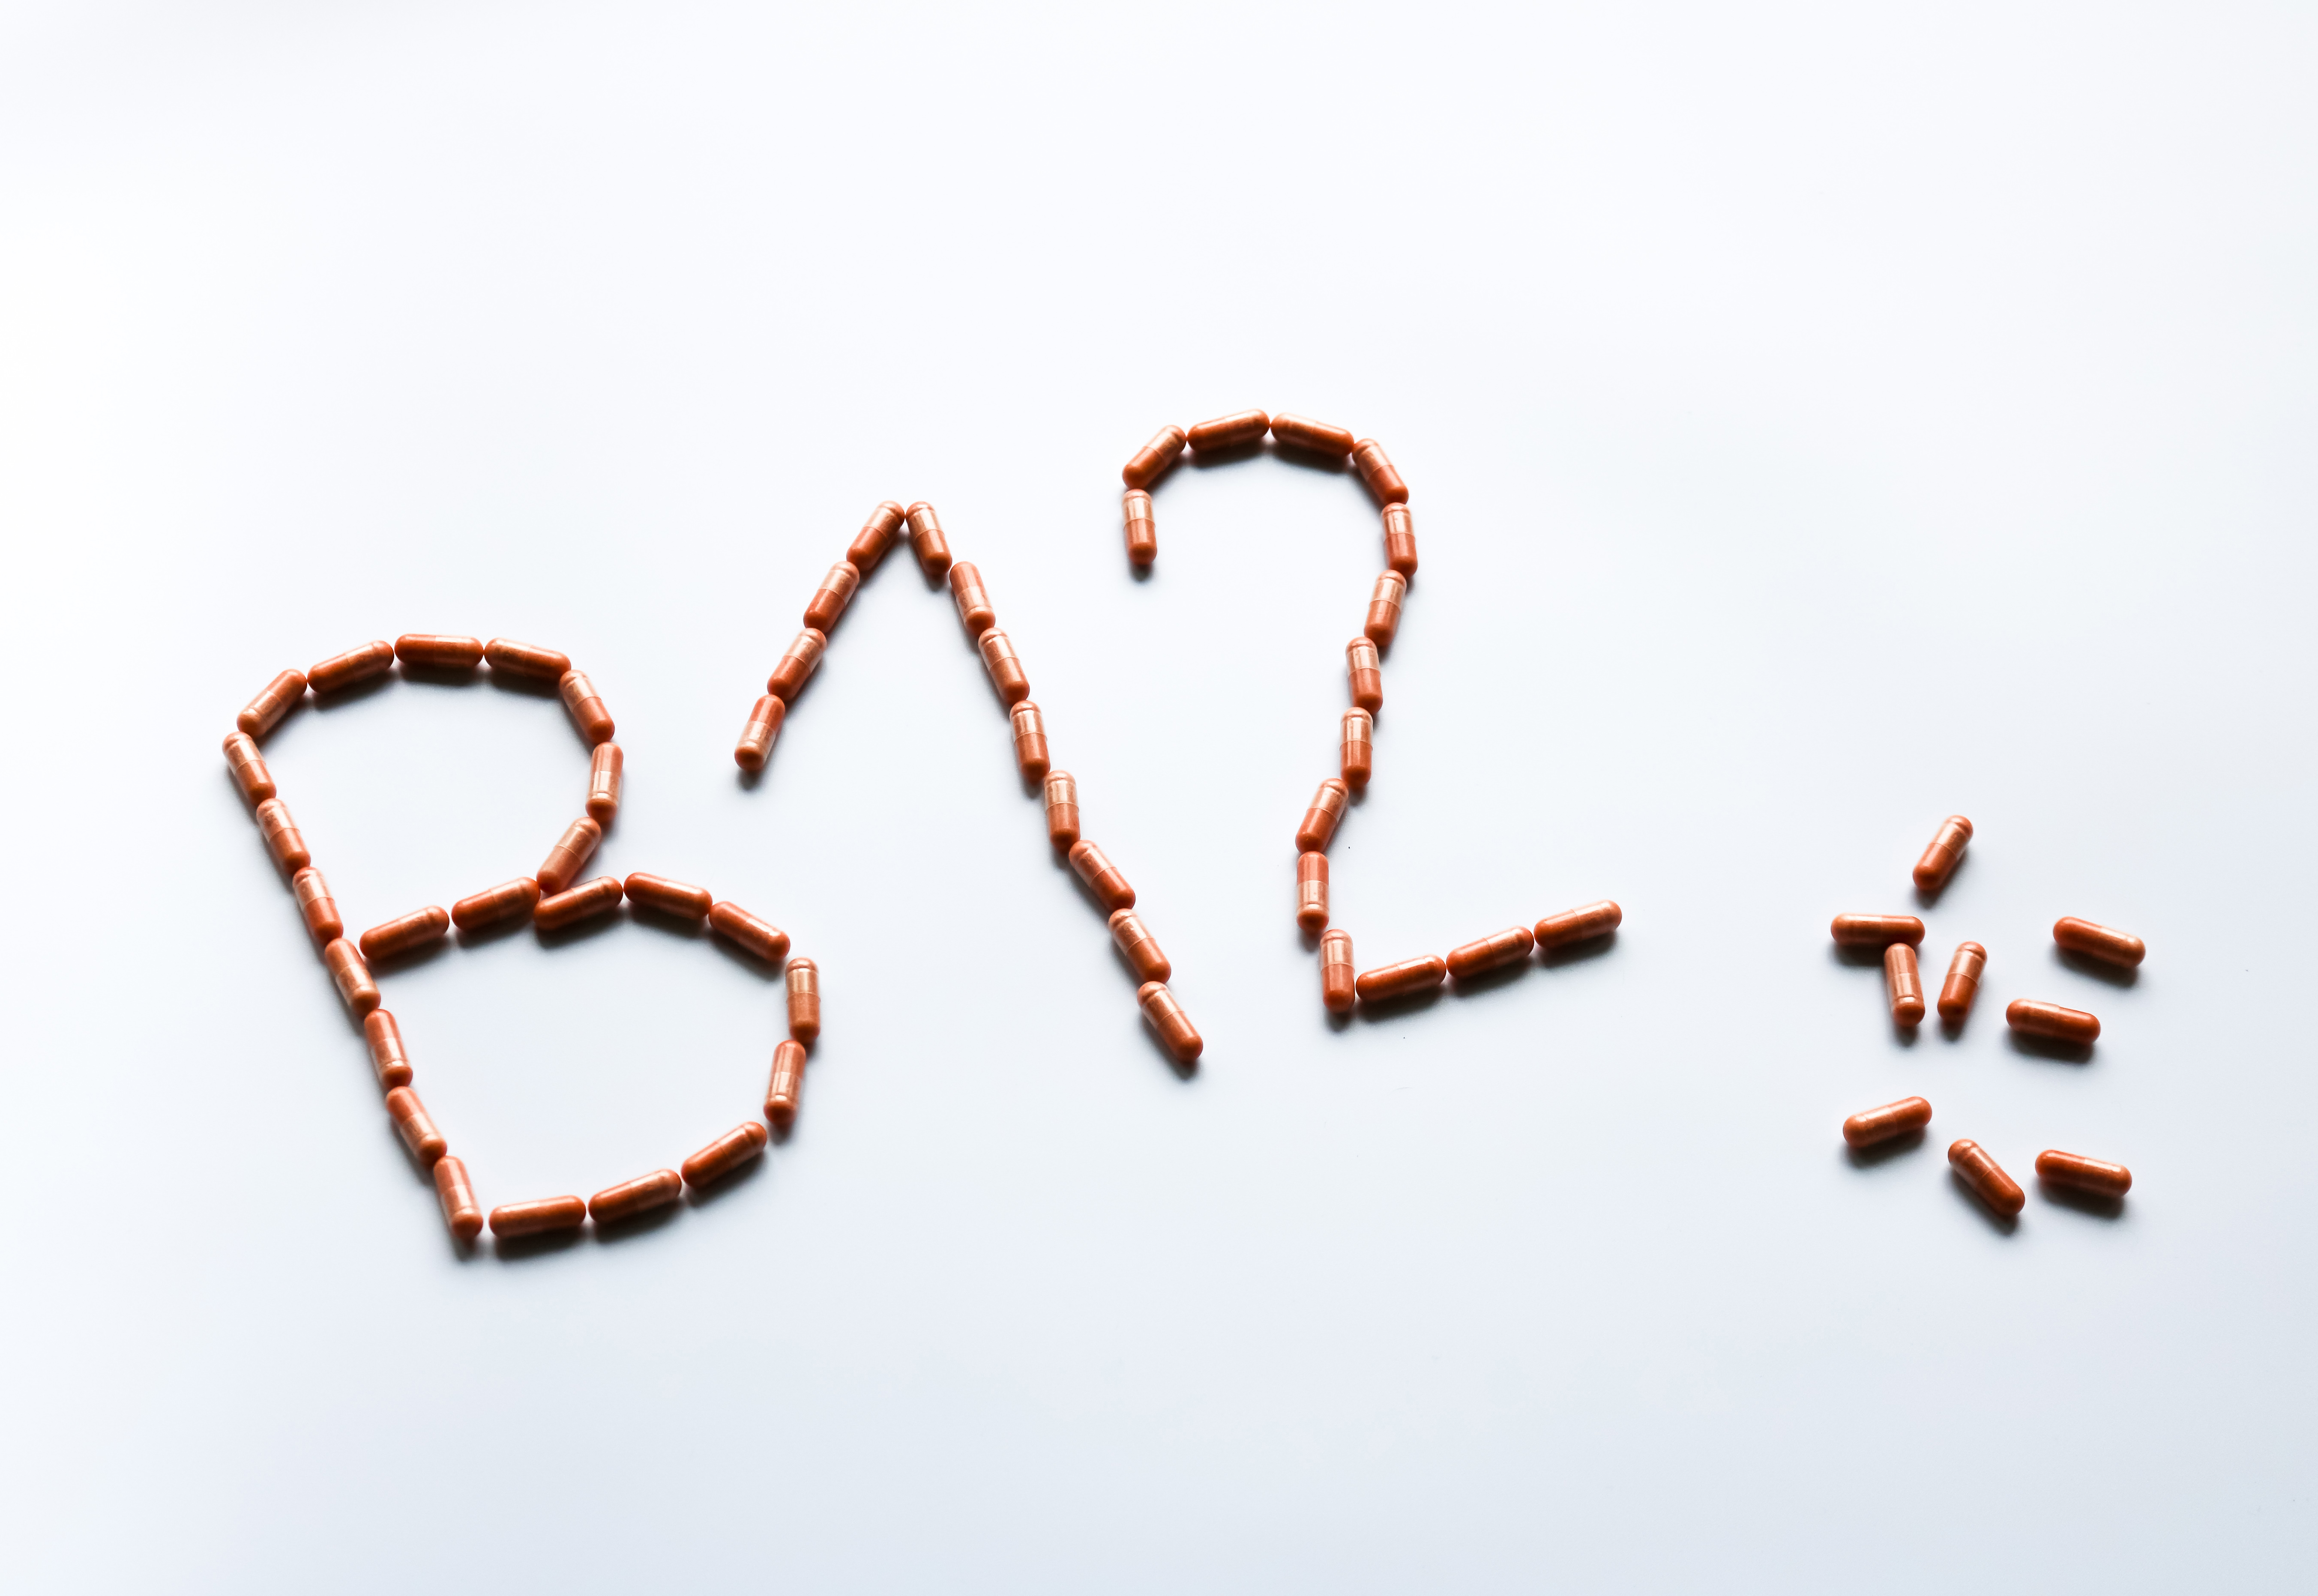 Vitamin B12 – What you need to know